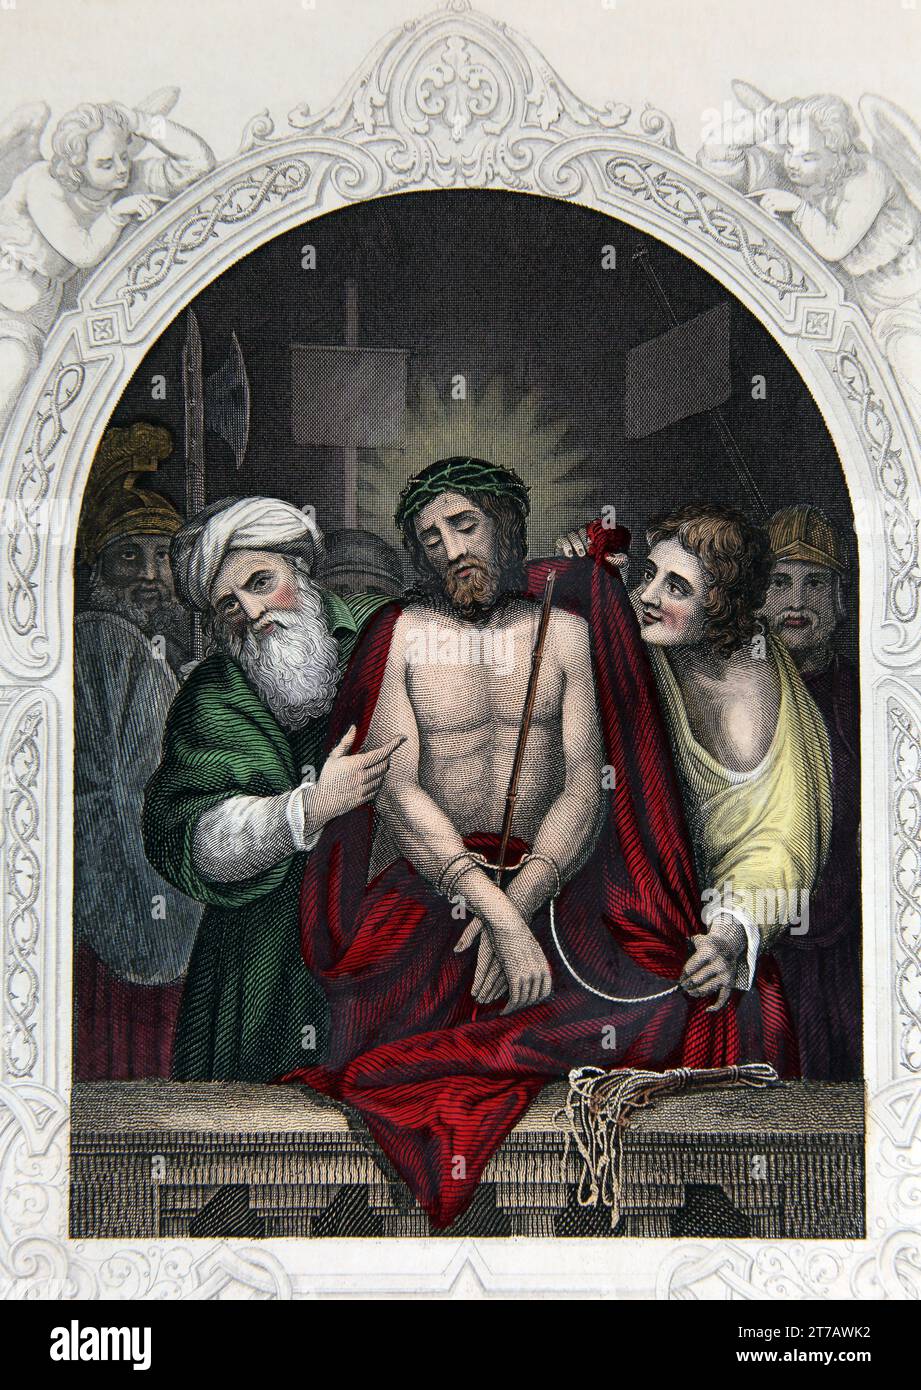 Illustration of Jesus Christ wearing the Crown of thorns with Pontius Pilate (John XIX.5) from the Self-Interpreting Family Bible Stock Photo